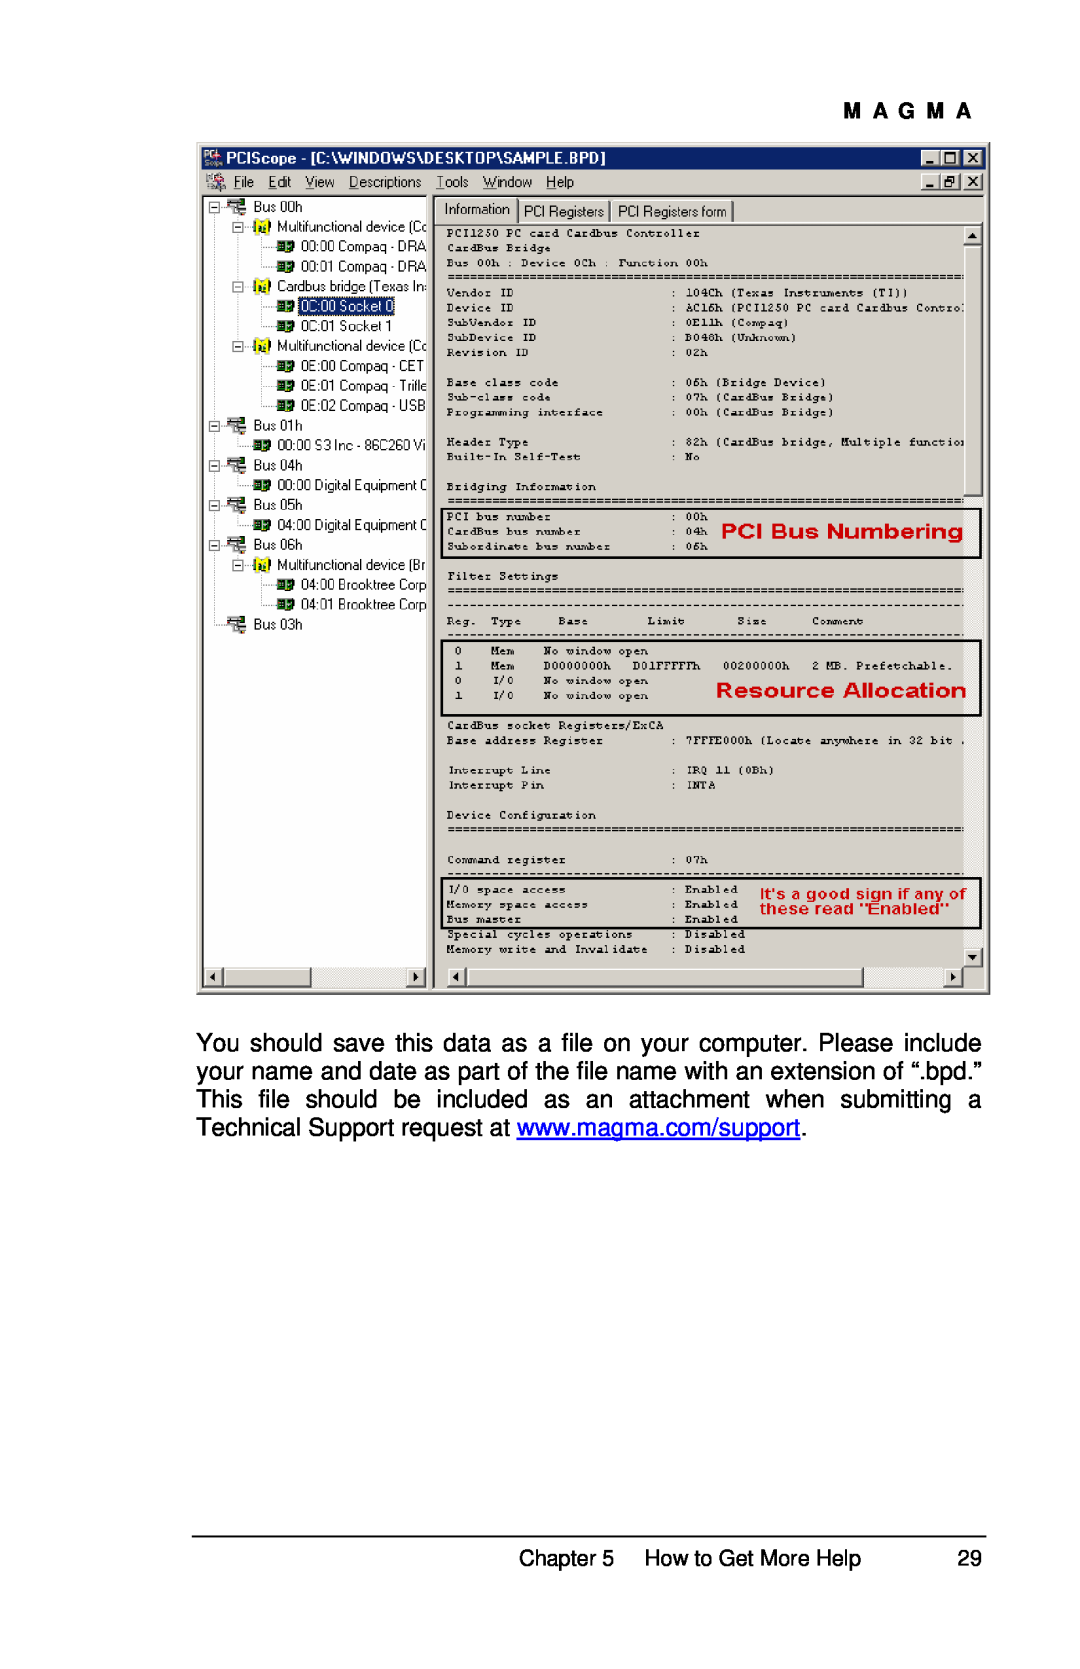 Compaq EB1F, EB1H user manual M A G M A, How to Get More Help 